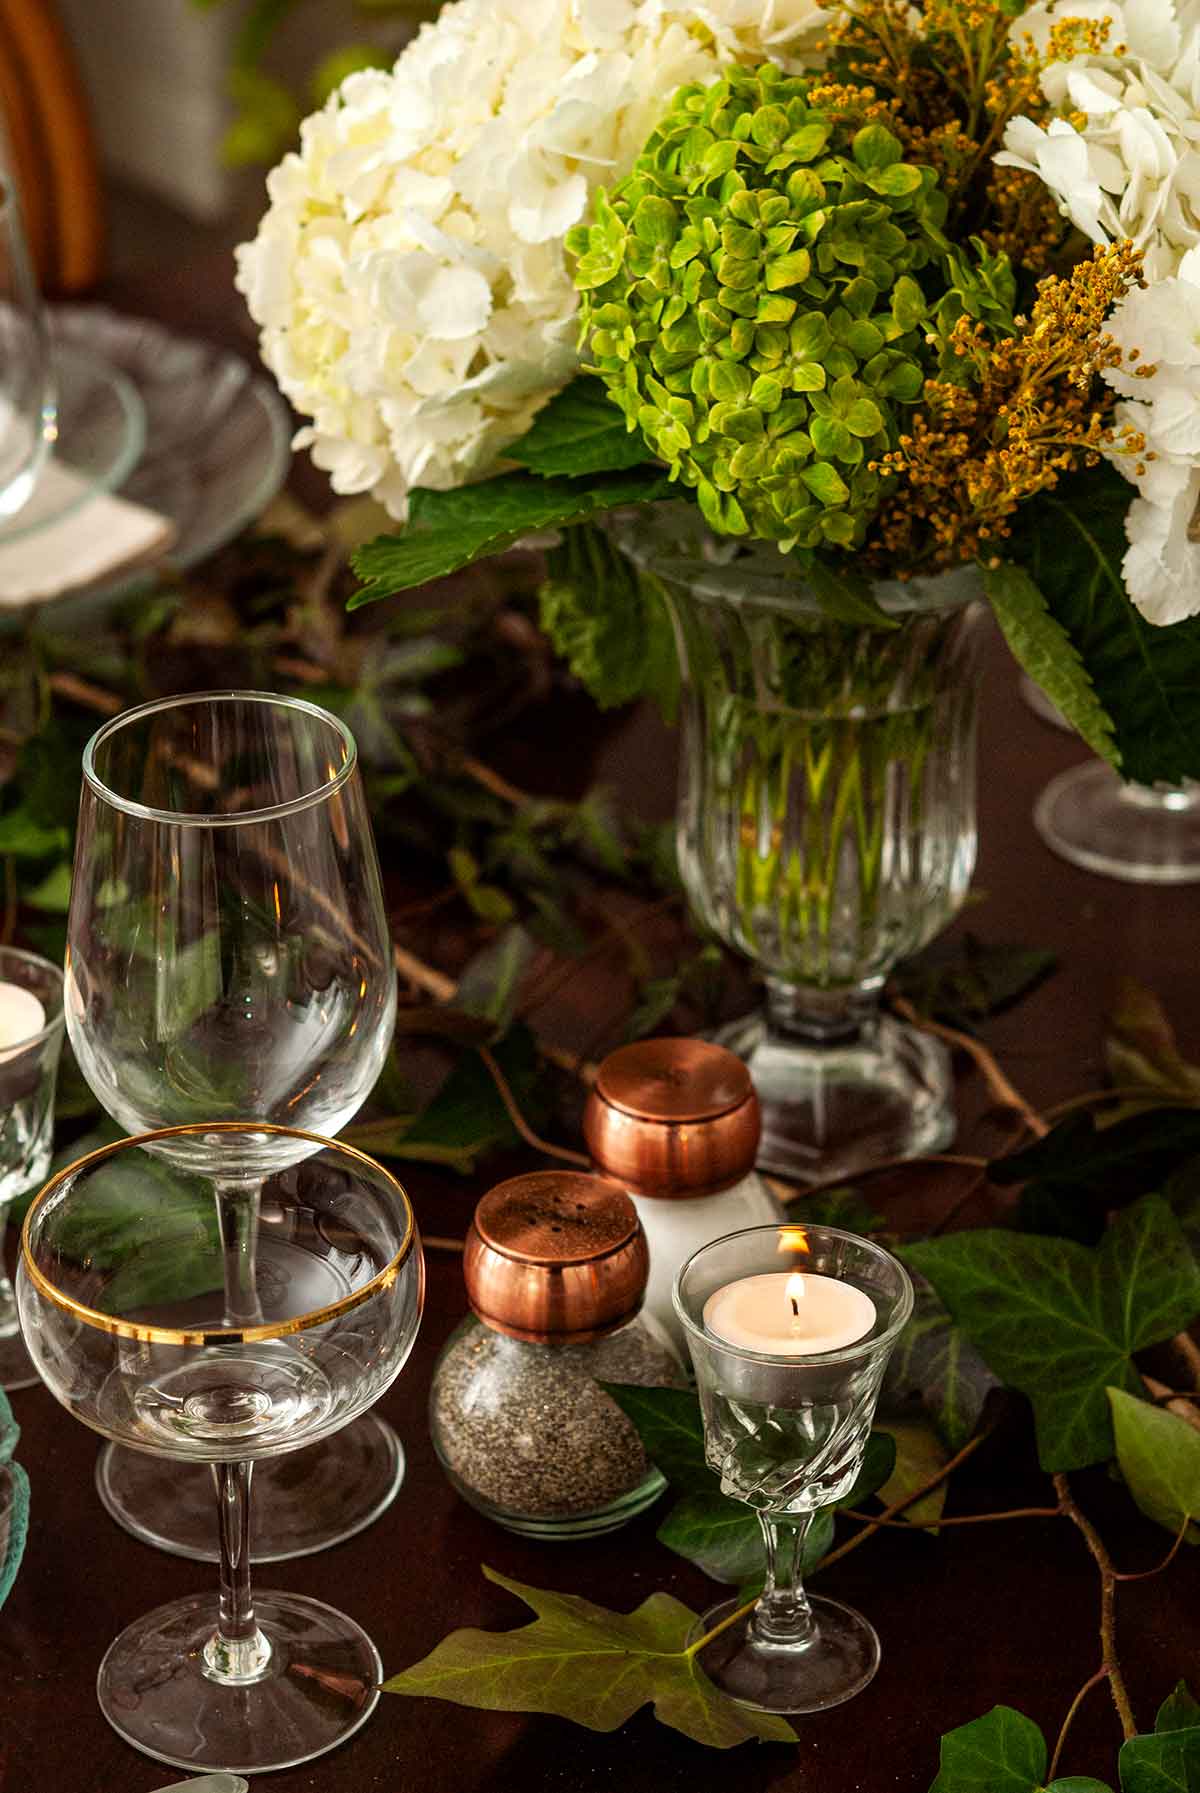 A vase of flowers, salt and pepper shakers, glassware and a candle in a cordial glass on a table.